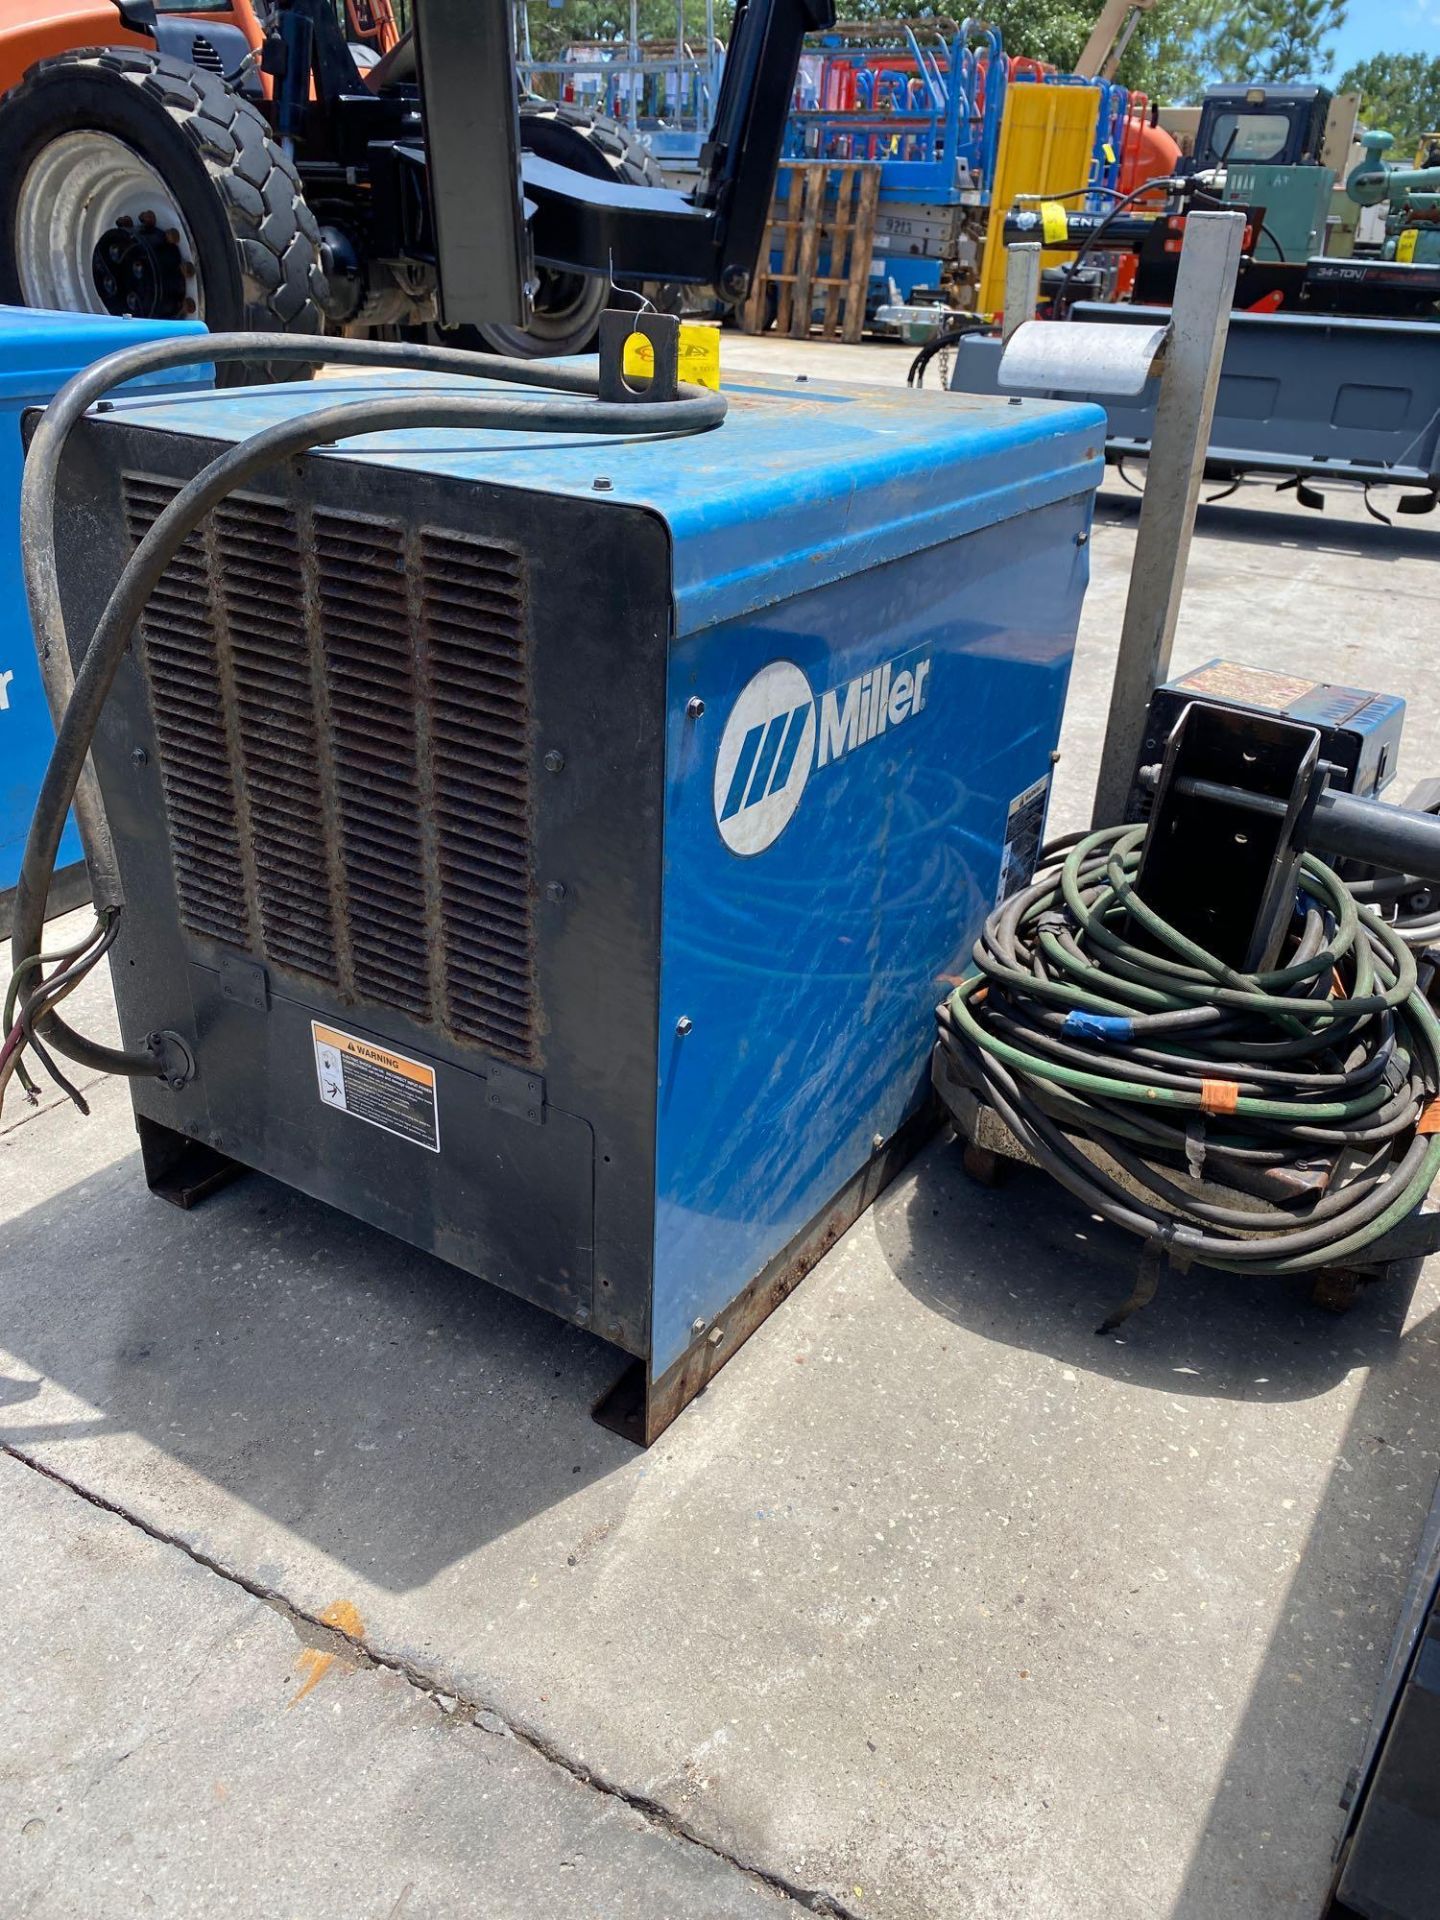 MILLER CP-302 ELECTRIC WELDER WITH MILLER 60 SERIES 24V WIRE FEEDER AND CABLES/CORDS - Image 6 of 10